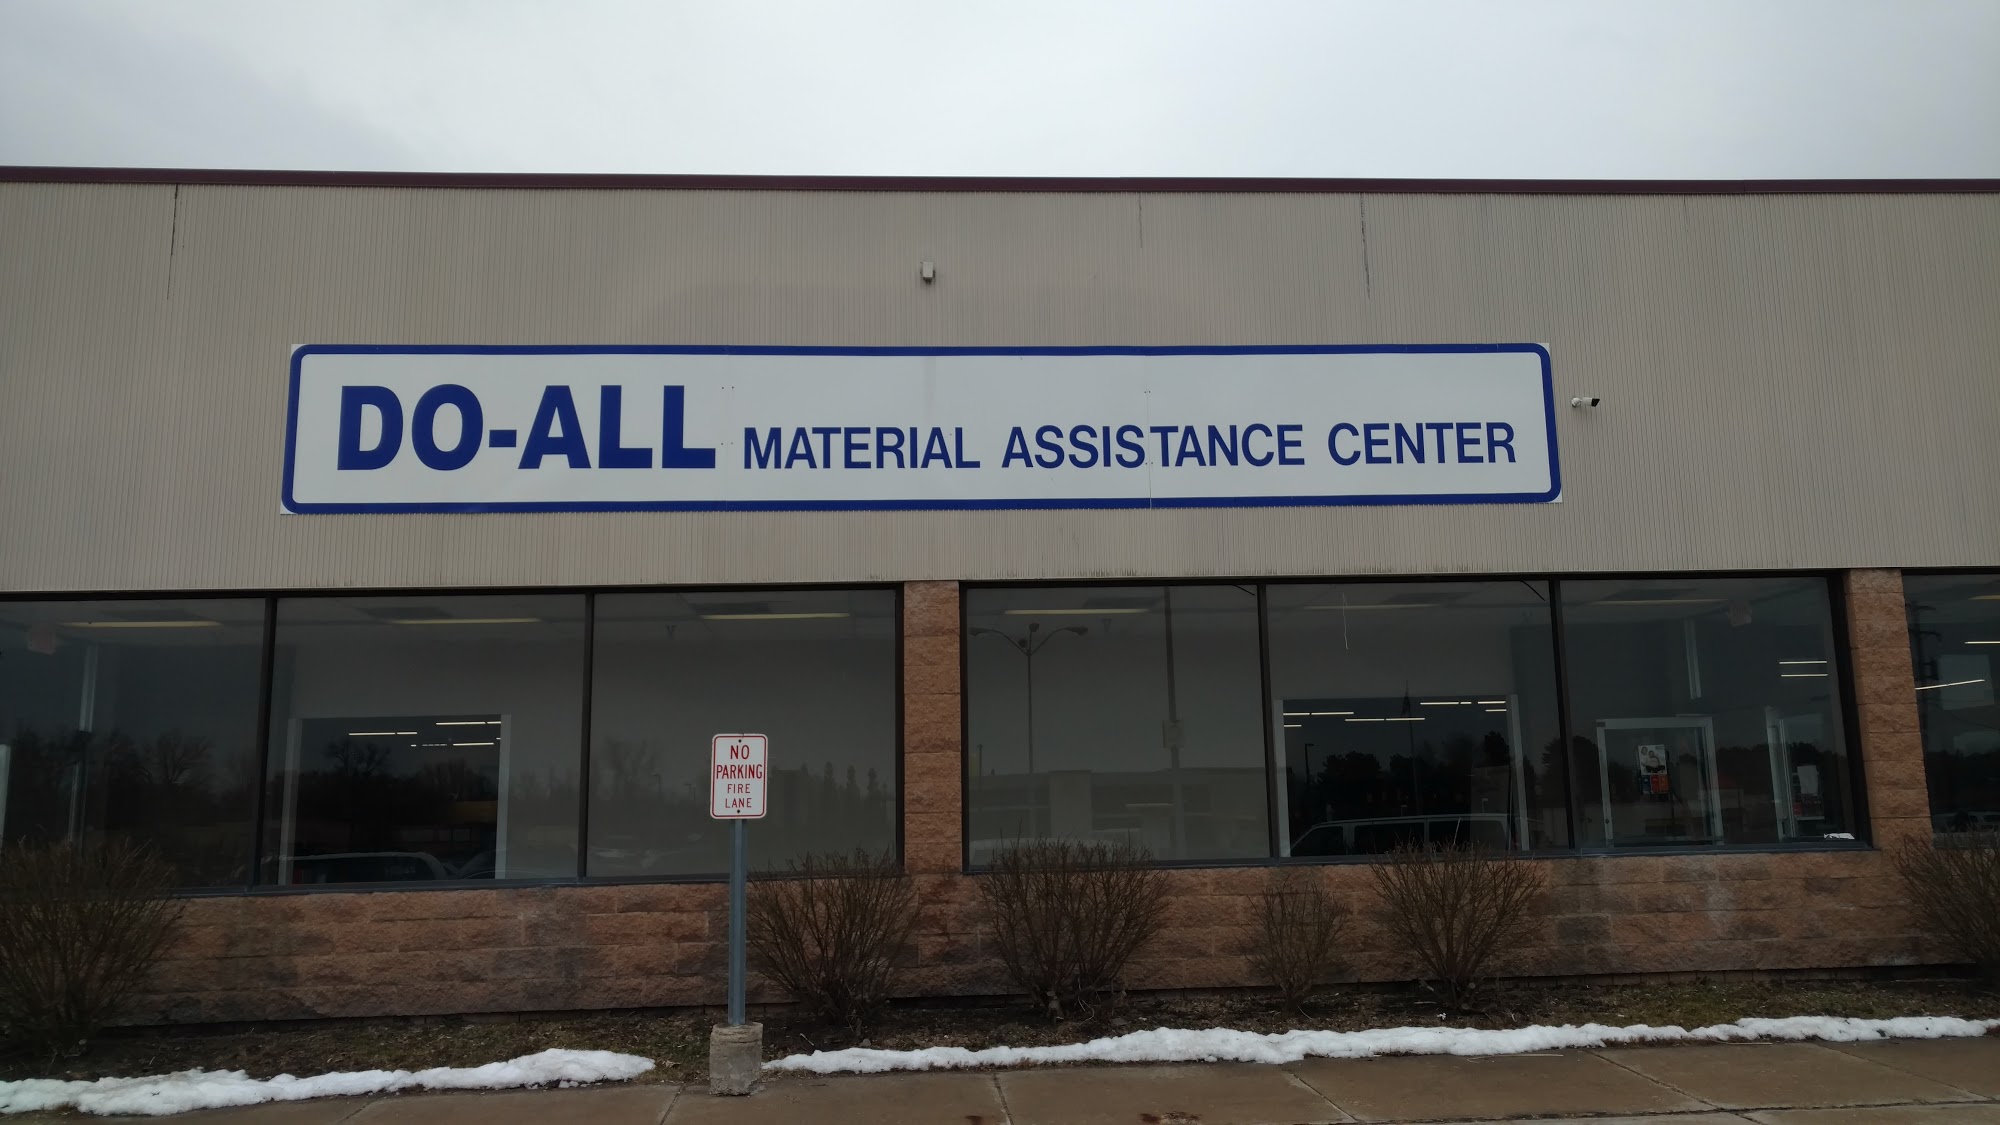 Do-All Material Assistance Center